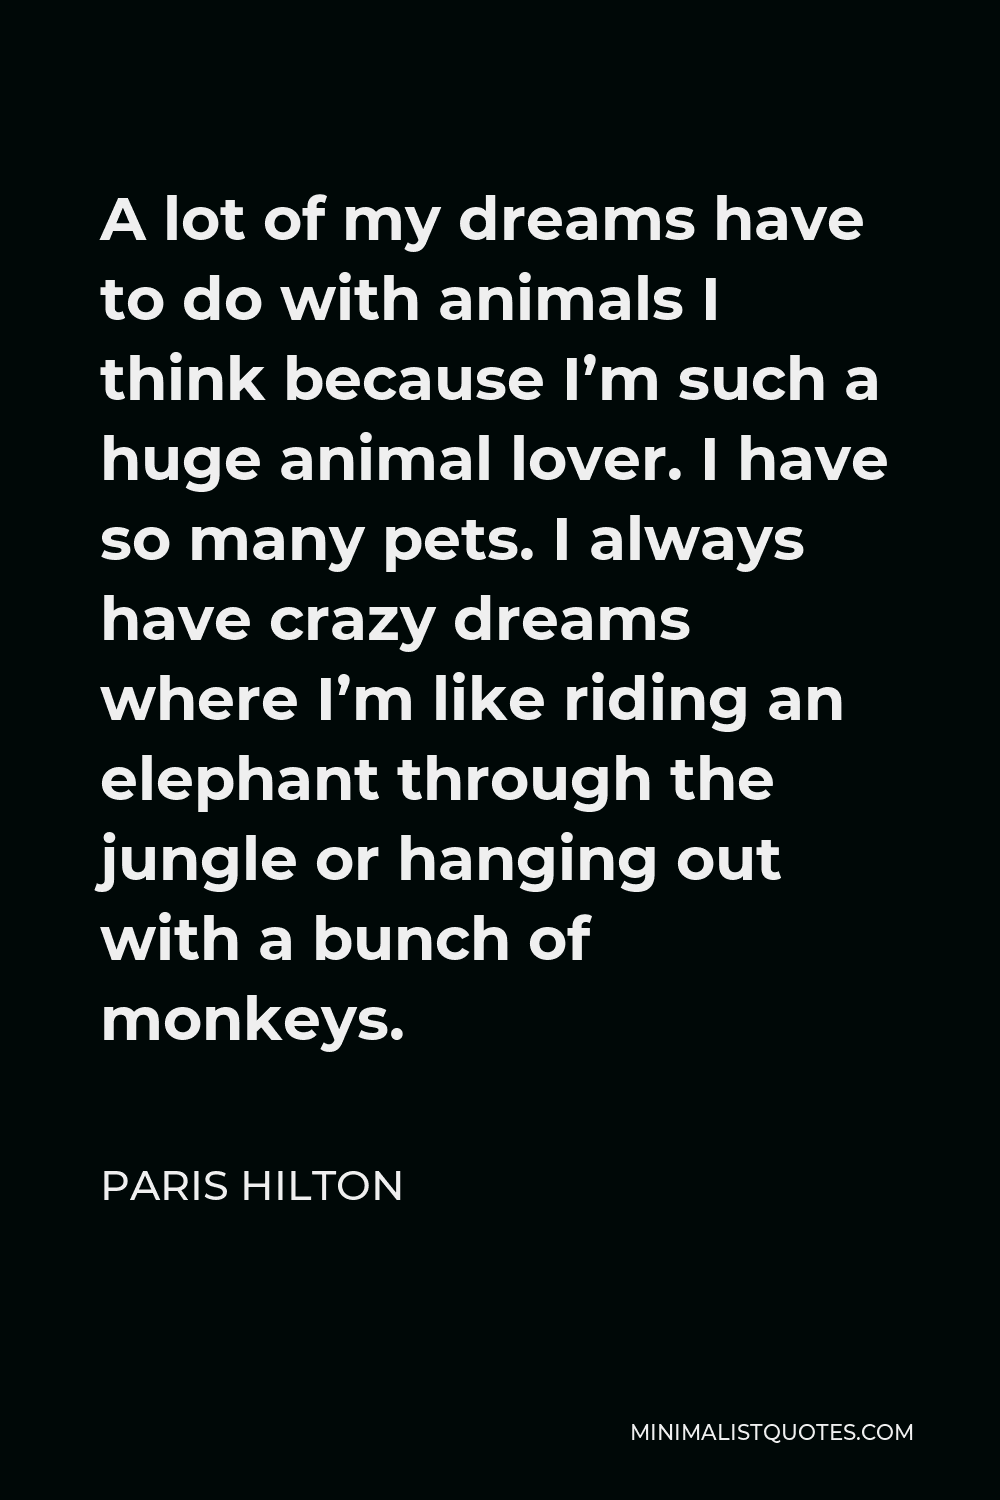 Paris Hilton Quote - A lot of my dreams have to do with animals I think because I’m such a huge animal lover. I have so many pets. I always have crazy dreams where I’m like riding an elephant through the jungle or hanging out with a bunch of monkeys.